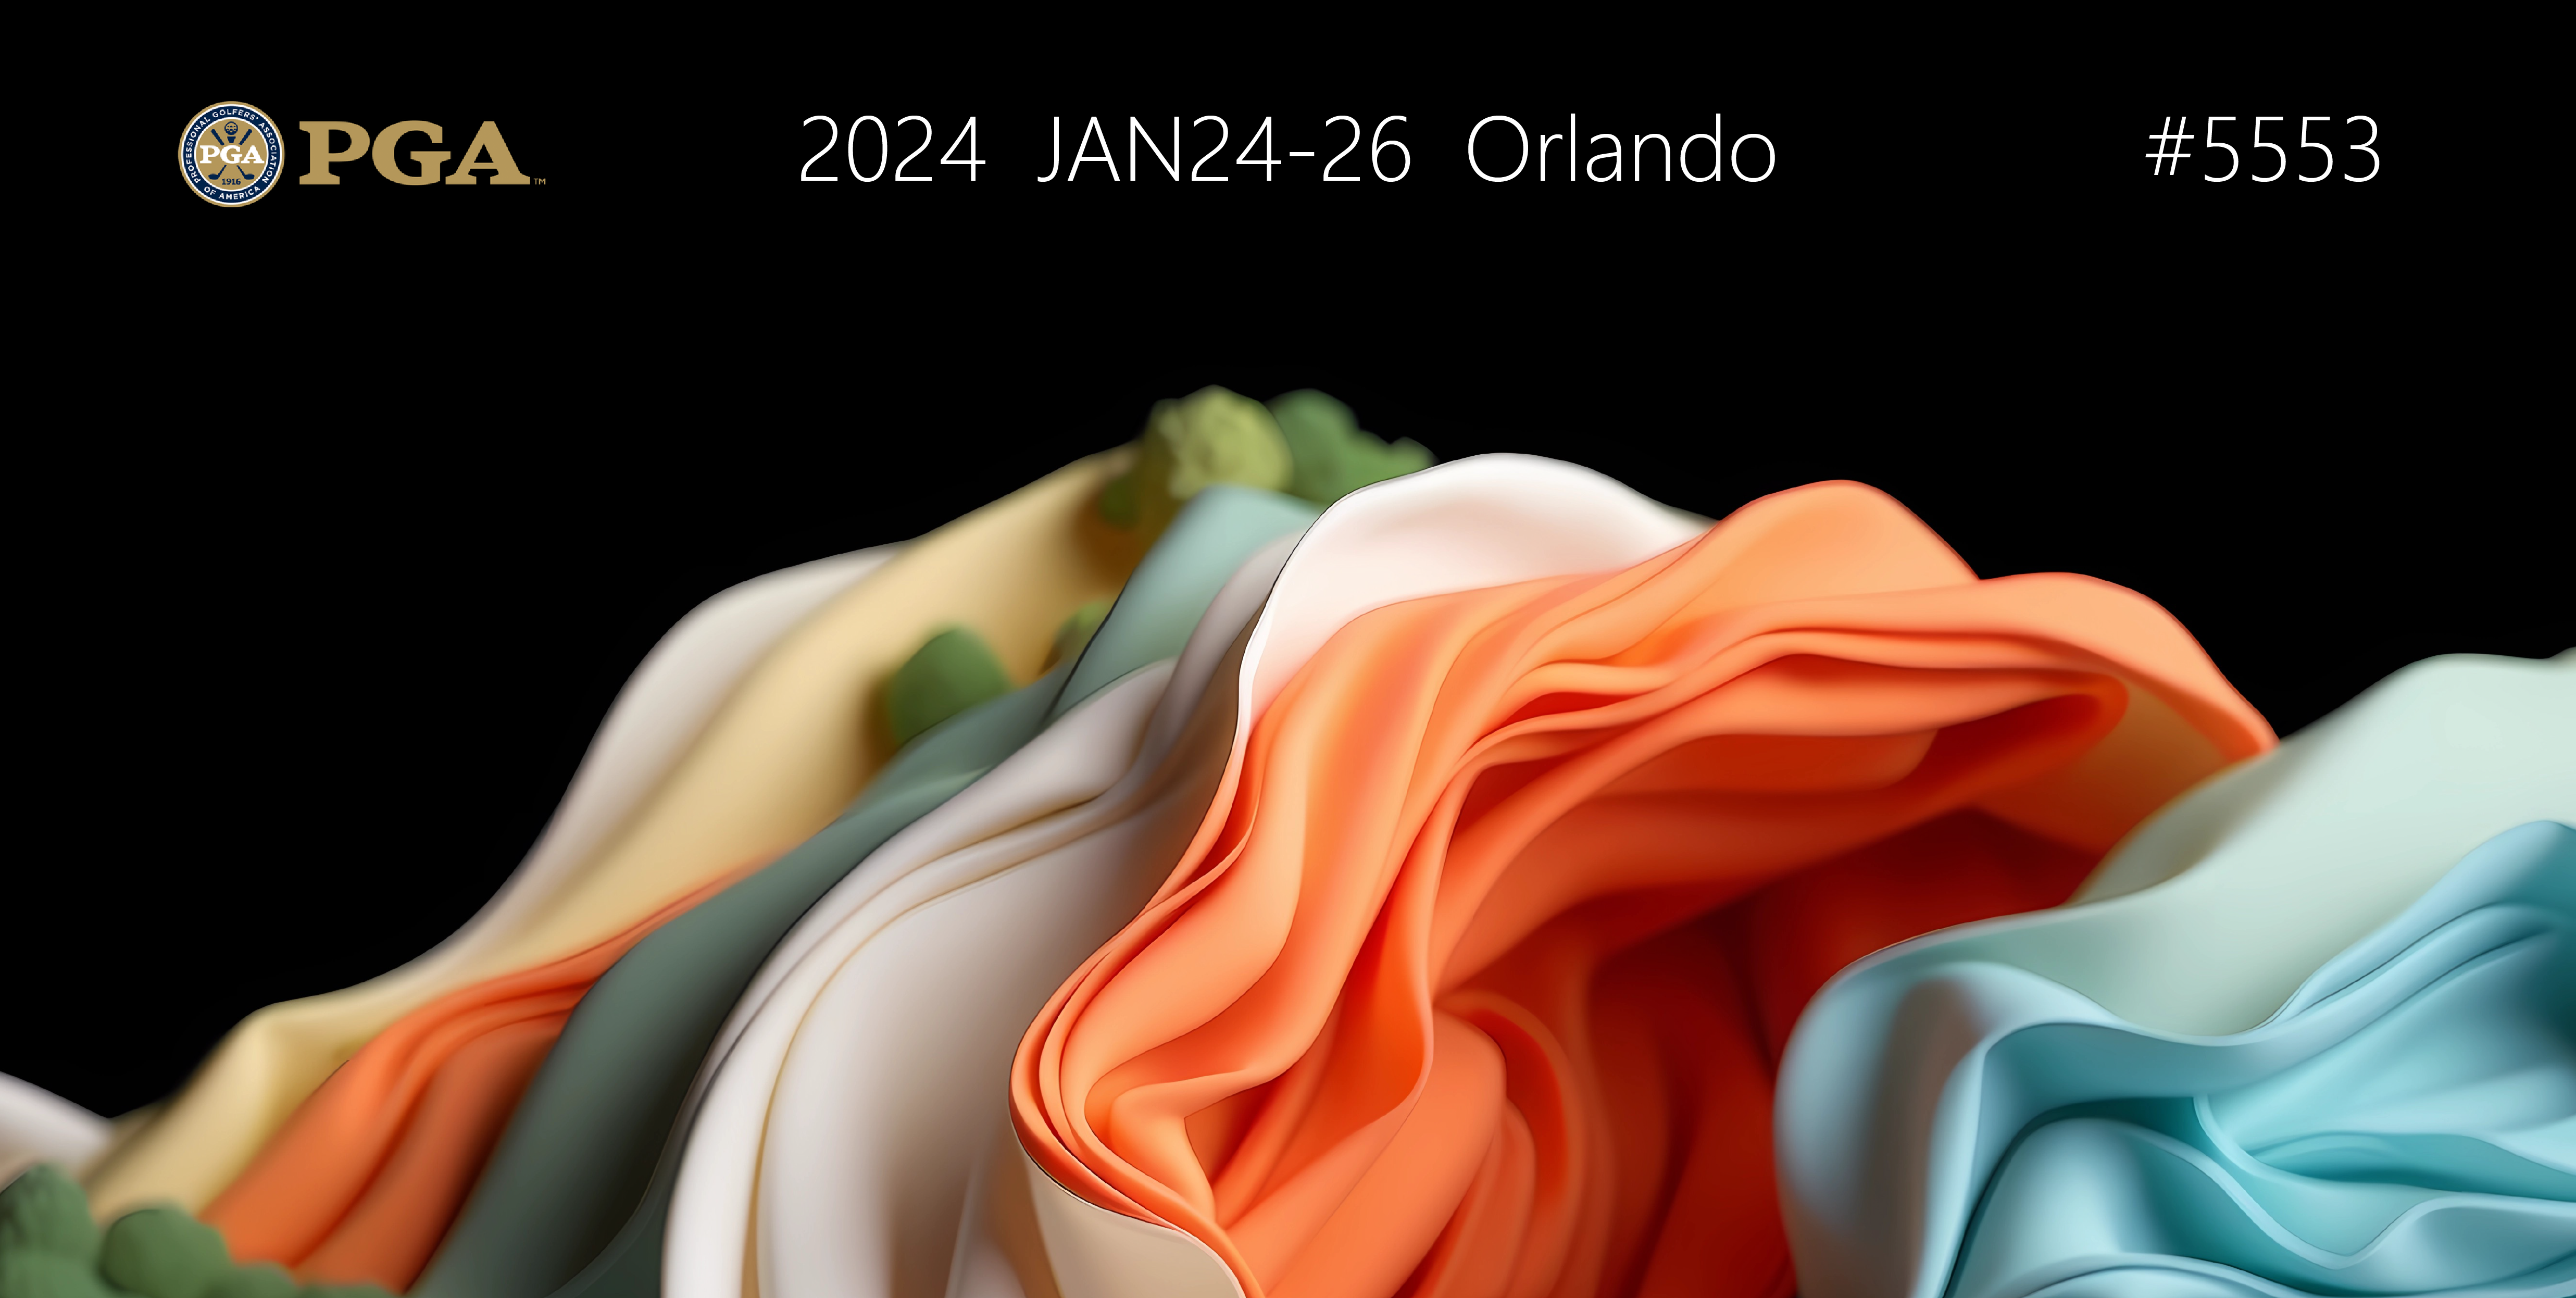 Hyperbola Tees Up Style at the PGA Show in Orlando Jan 24-26, 2024!